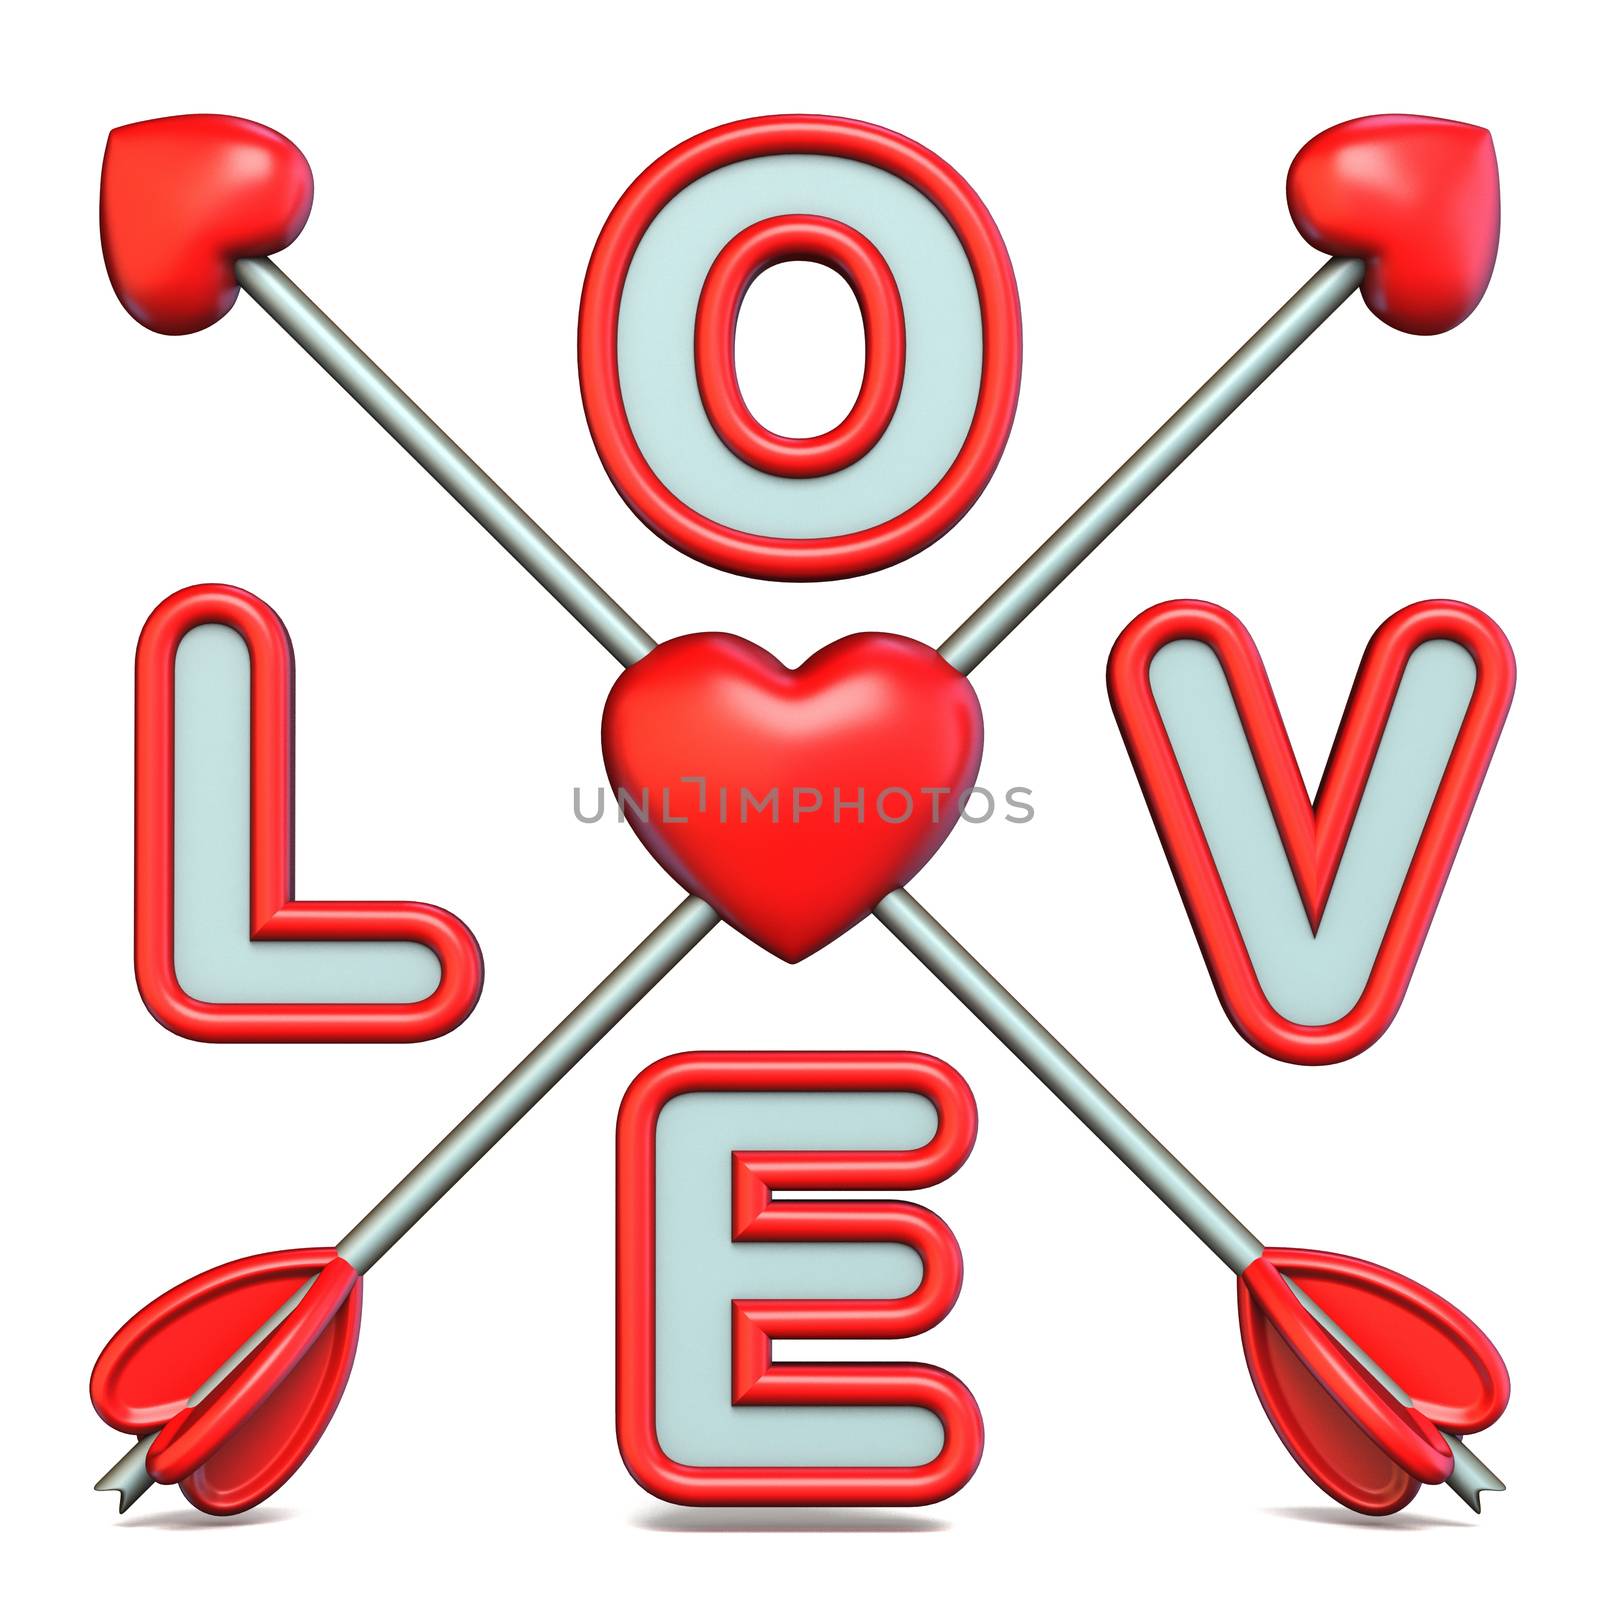 Love text with crossed Cupid's arrows 3D render illustration isolated on white background